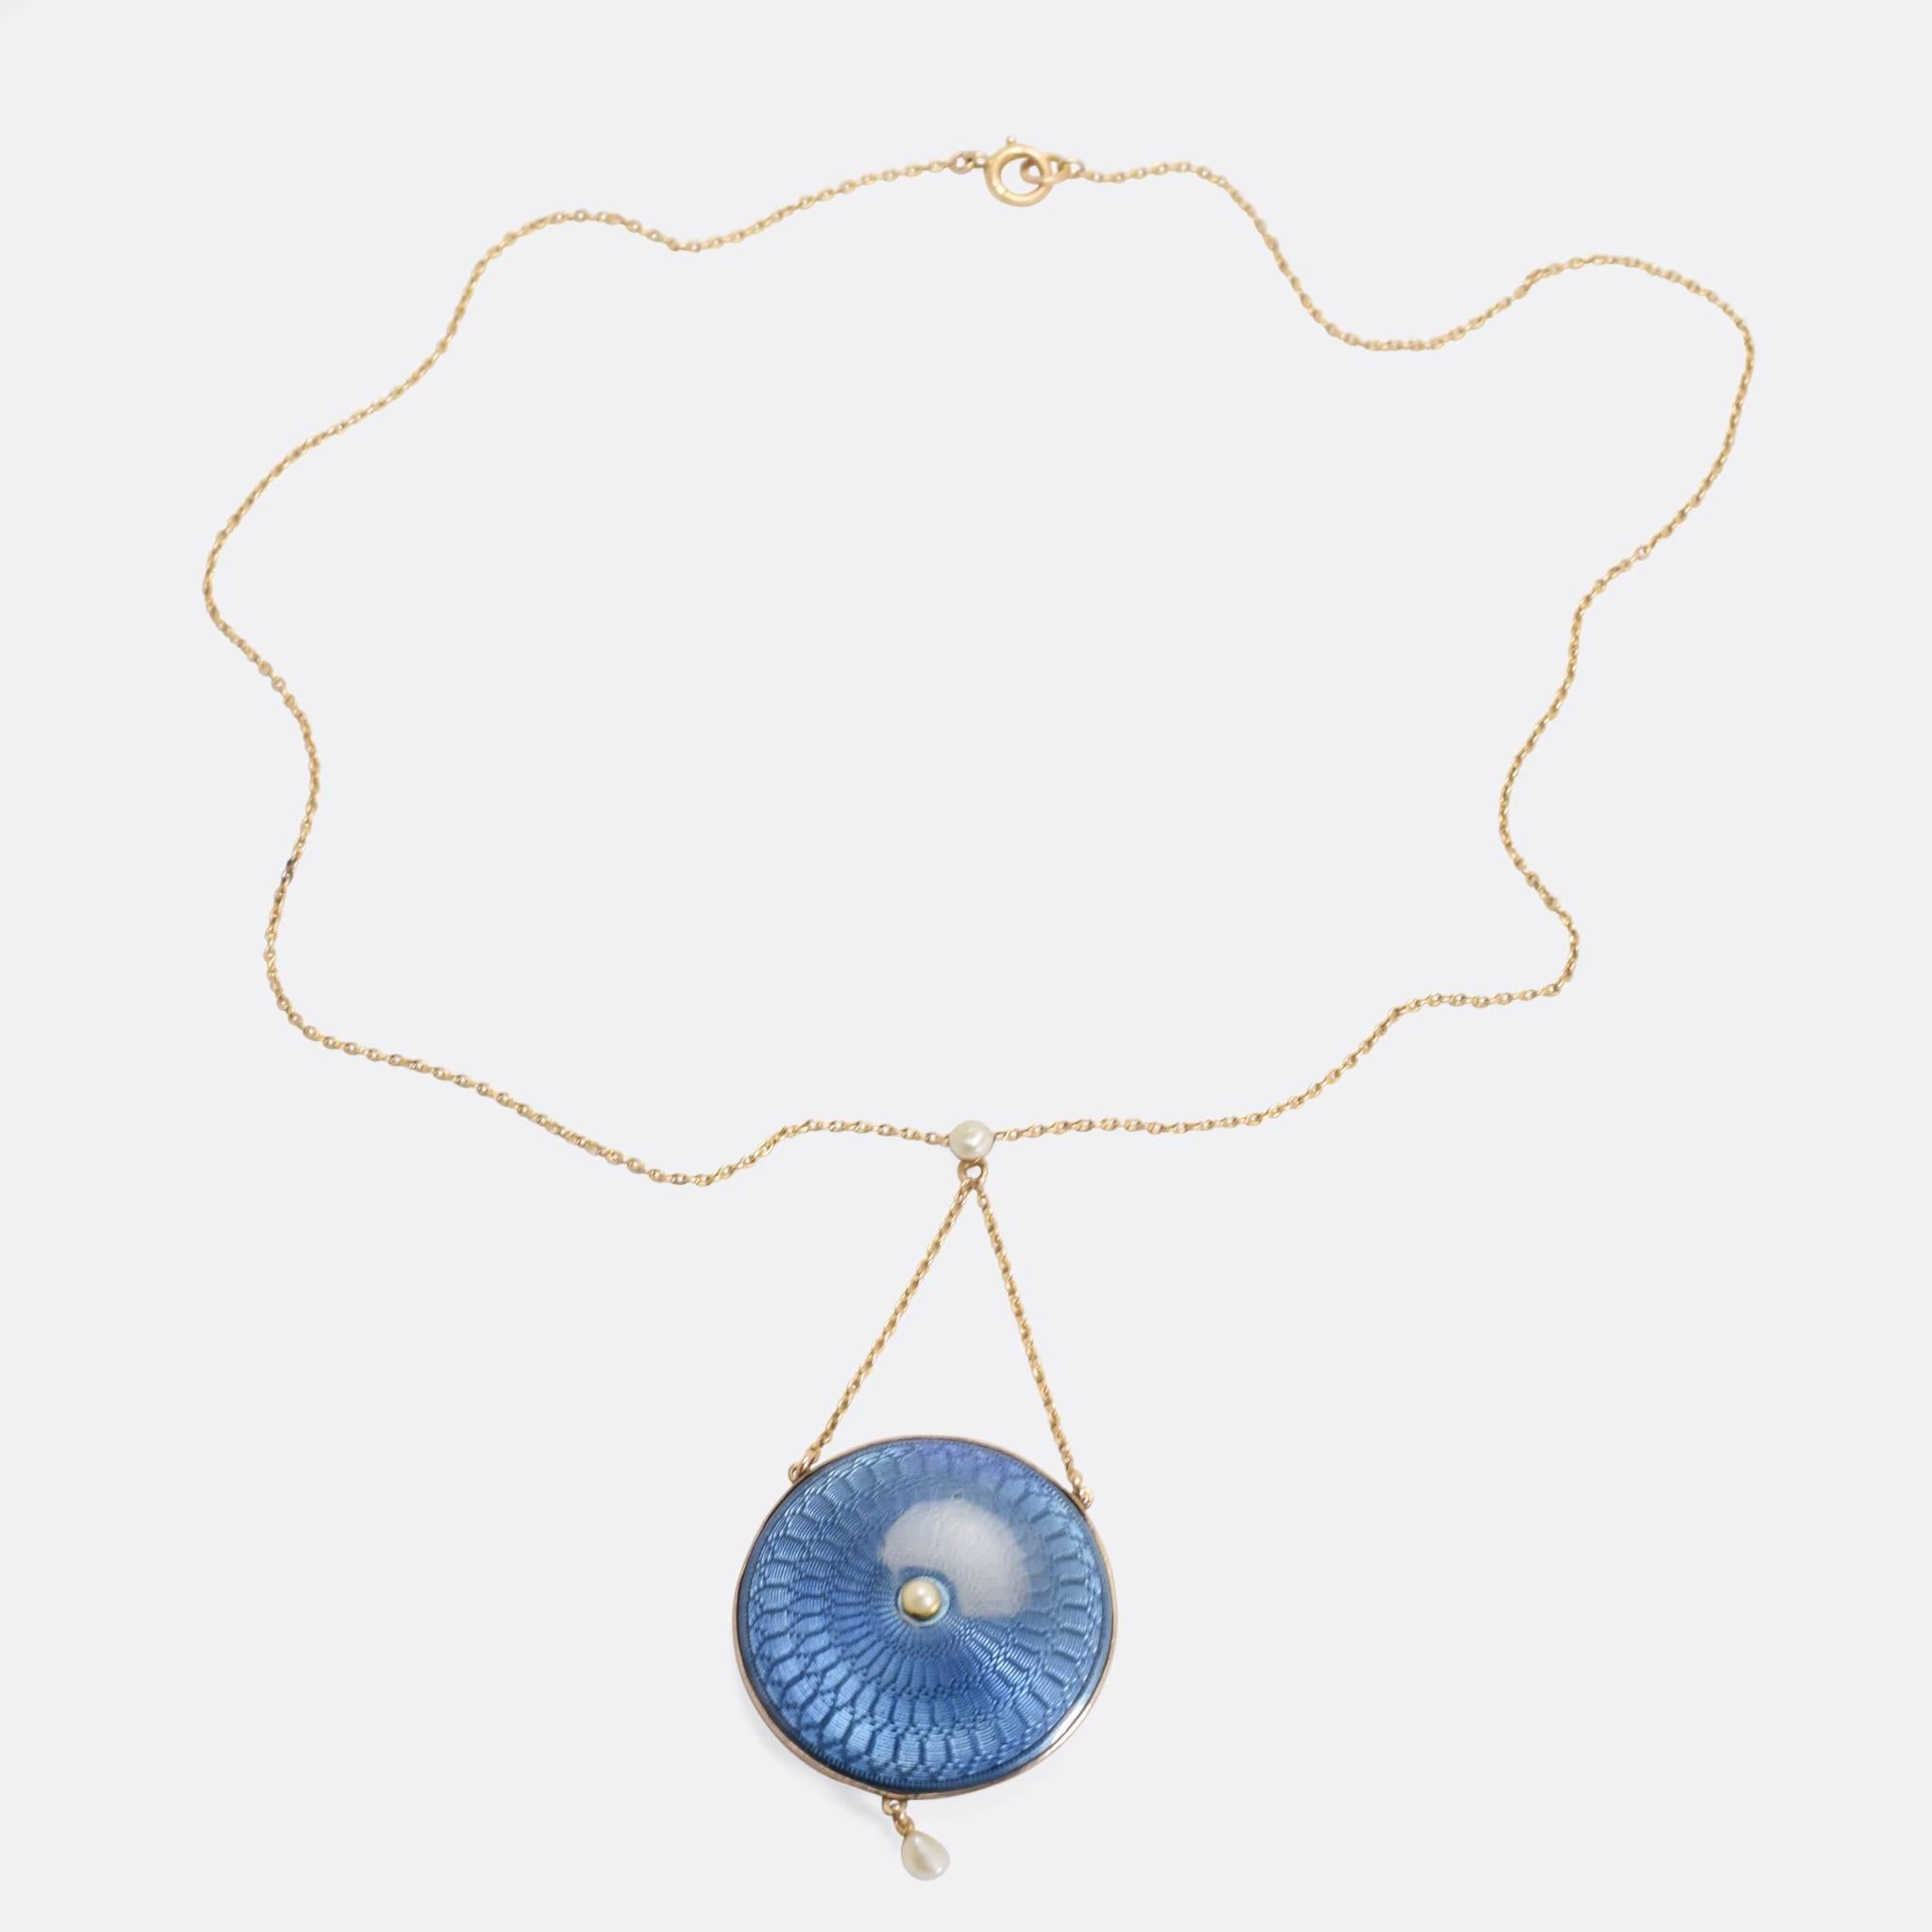 A stunning Edwardian round locket, finished in beautiful powderblue guilloché enamel. It hangs from a fine gold chain, with a pearl at the poin it crosses, another pearl in the middle of the locket, and a third (this one a baroque pearl) dangles